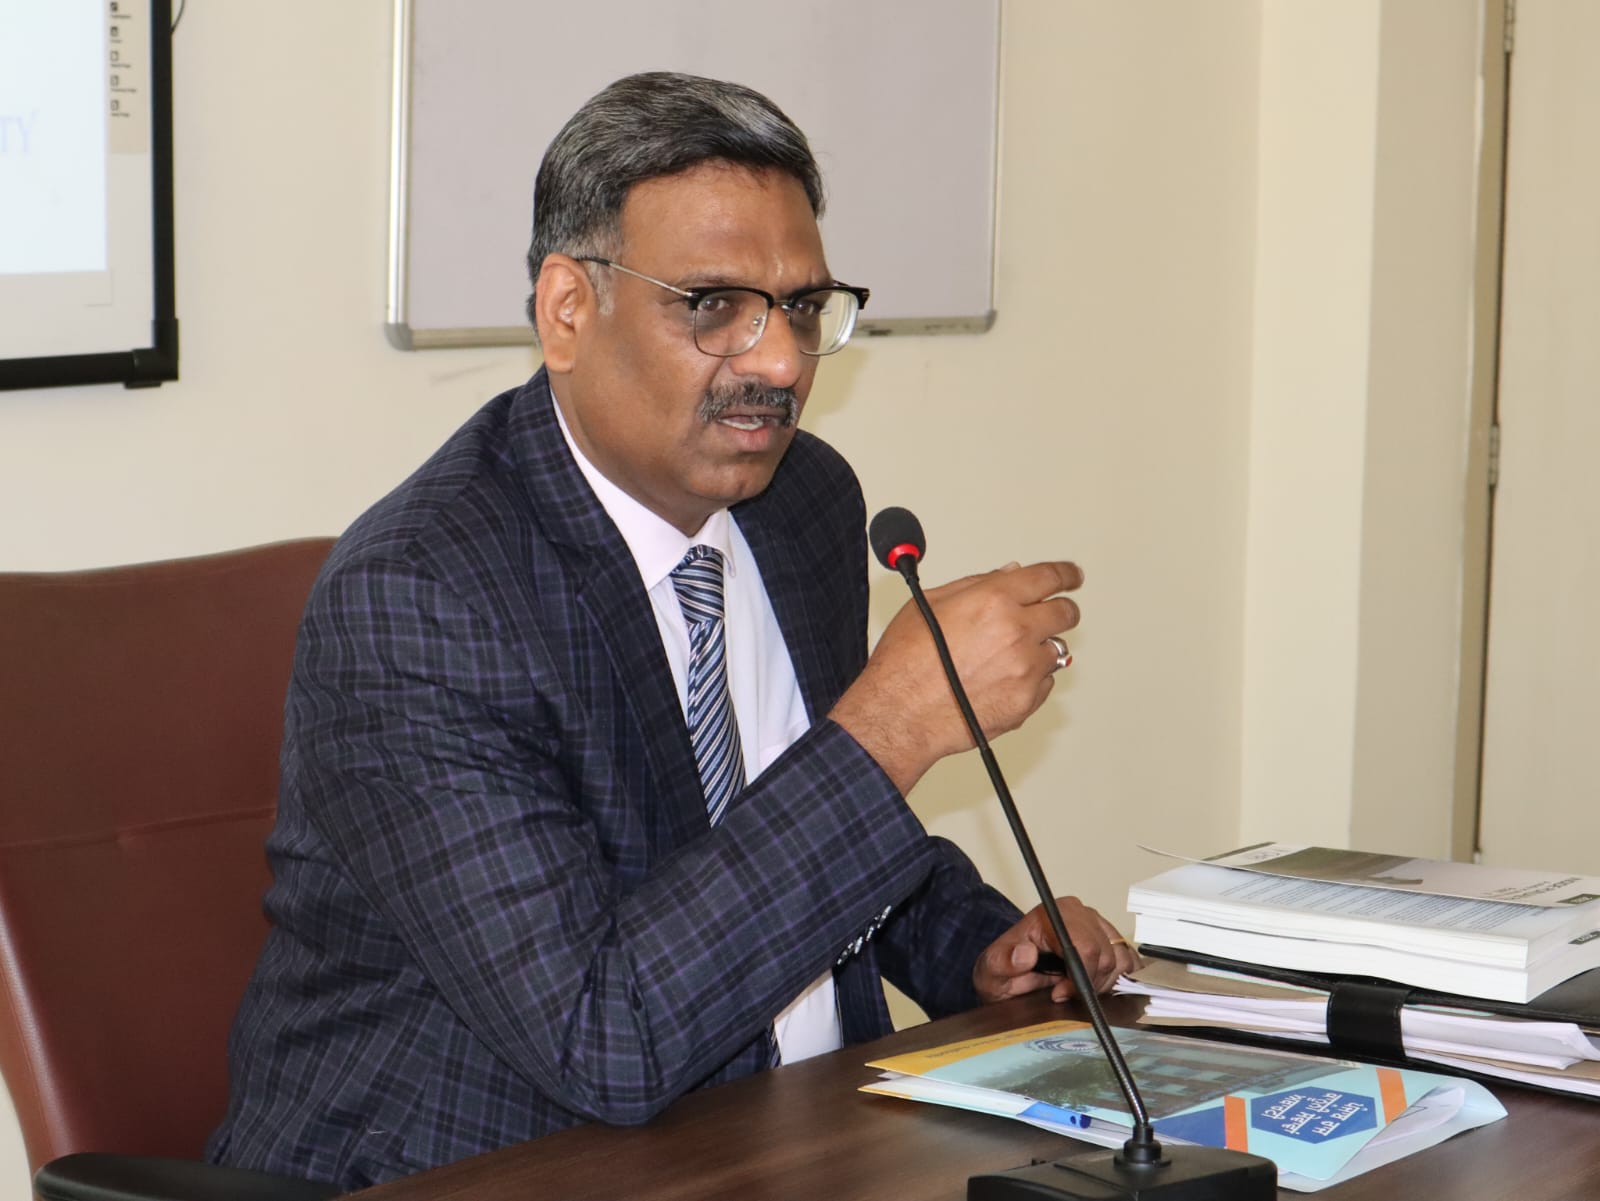 Sh. Arun Gupta, Member Secretary, PSLSA addressing the participants during the Training Programme organised for newly selected Legal Aid Defence Counsels